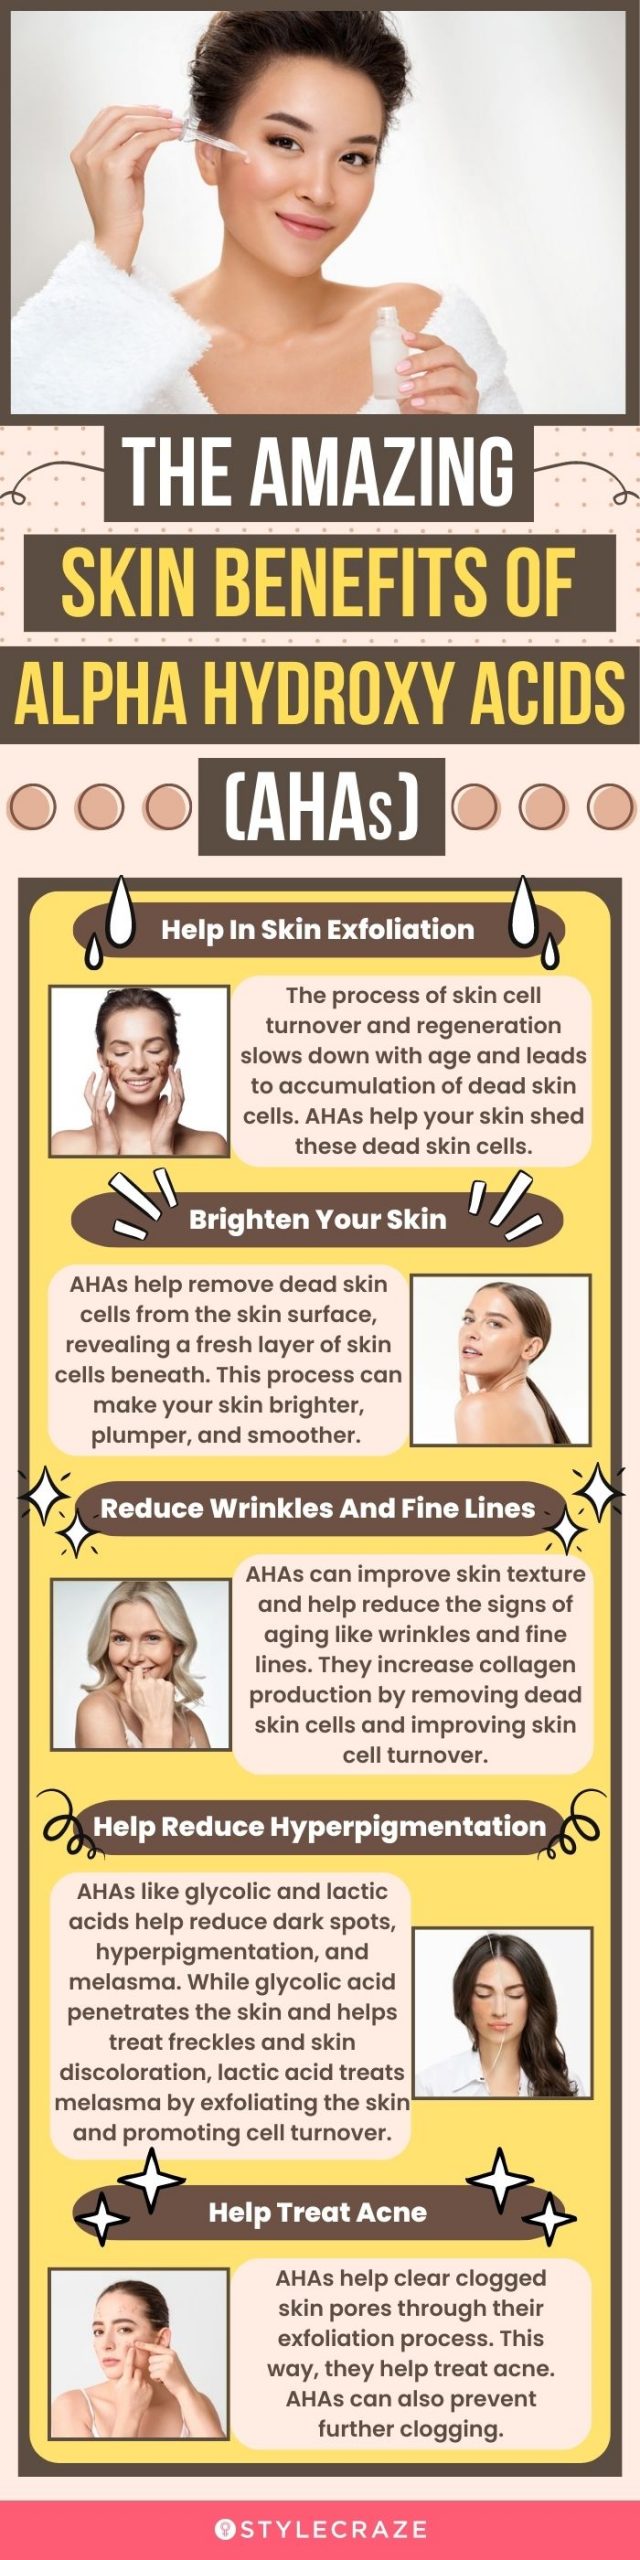 the amazing skin benefits of alpha hydroxy acids (ahas) (infographic)